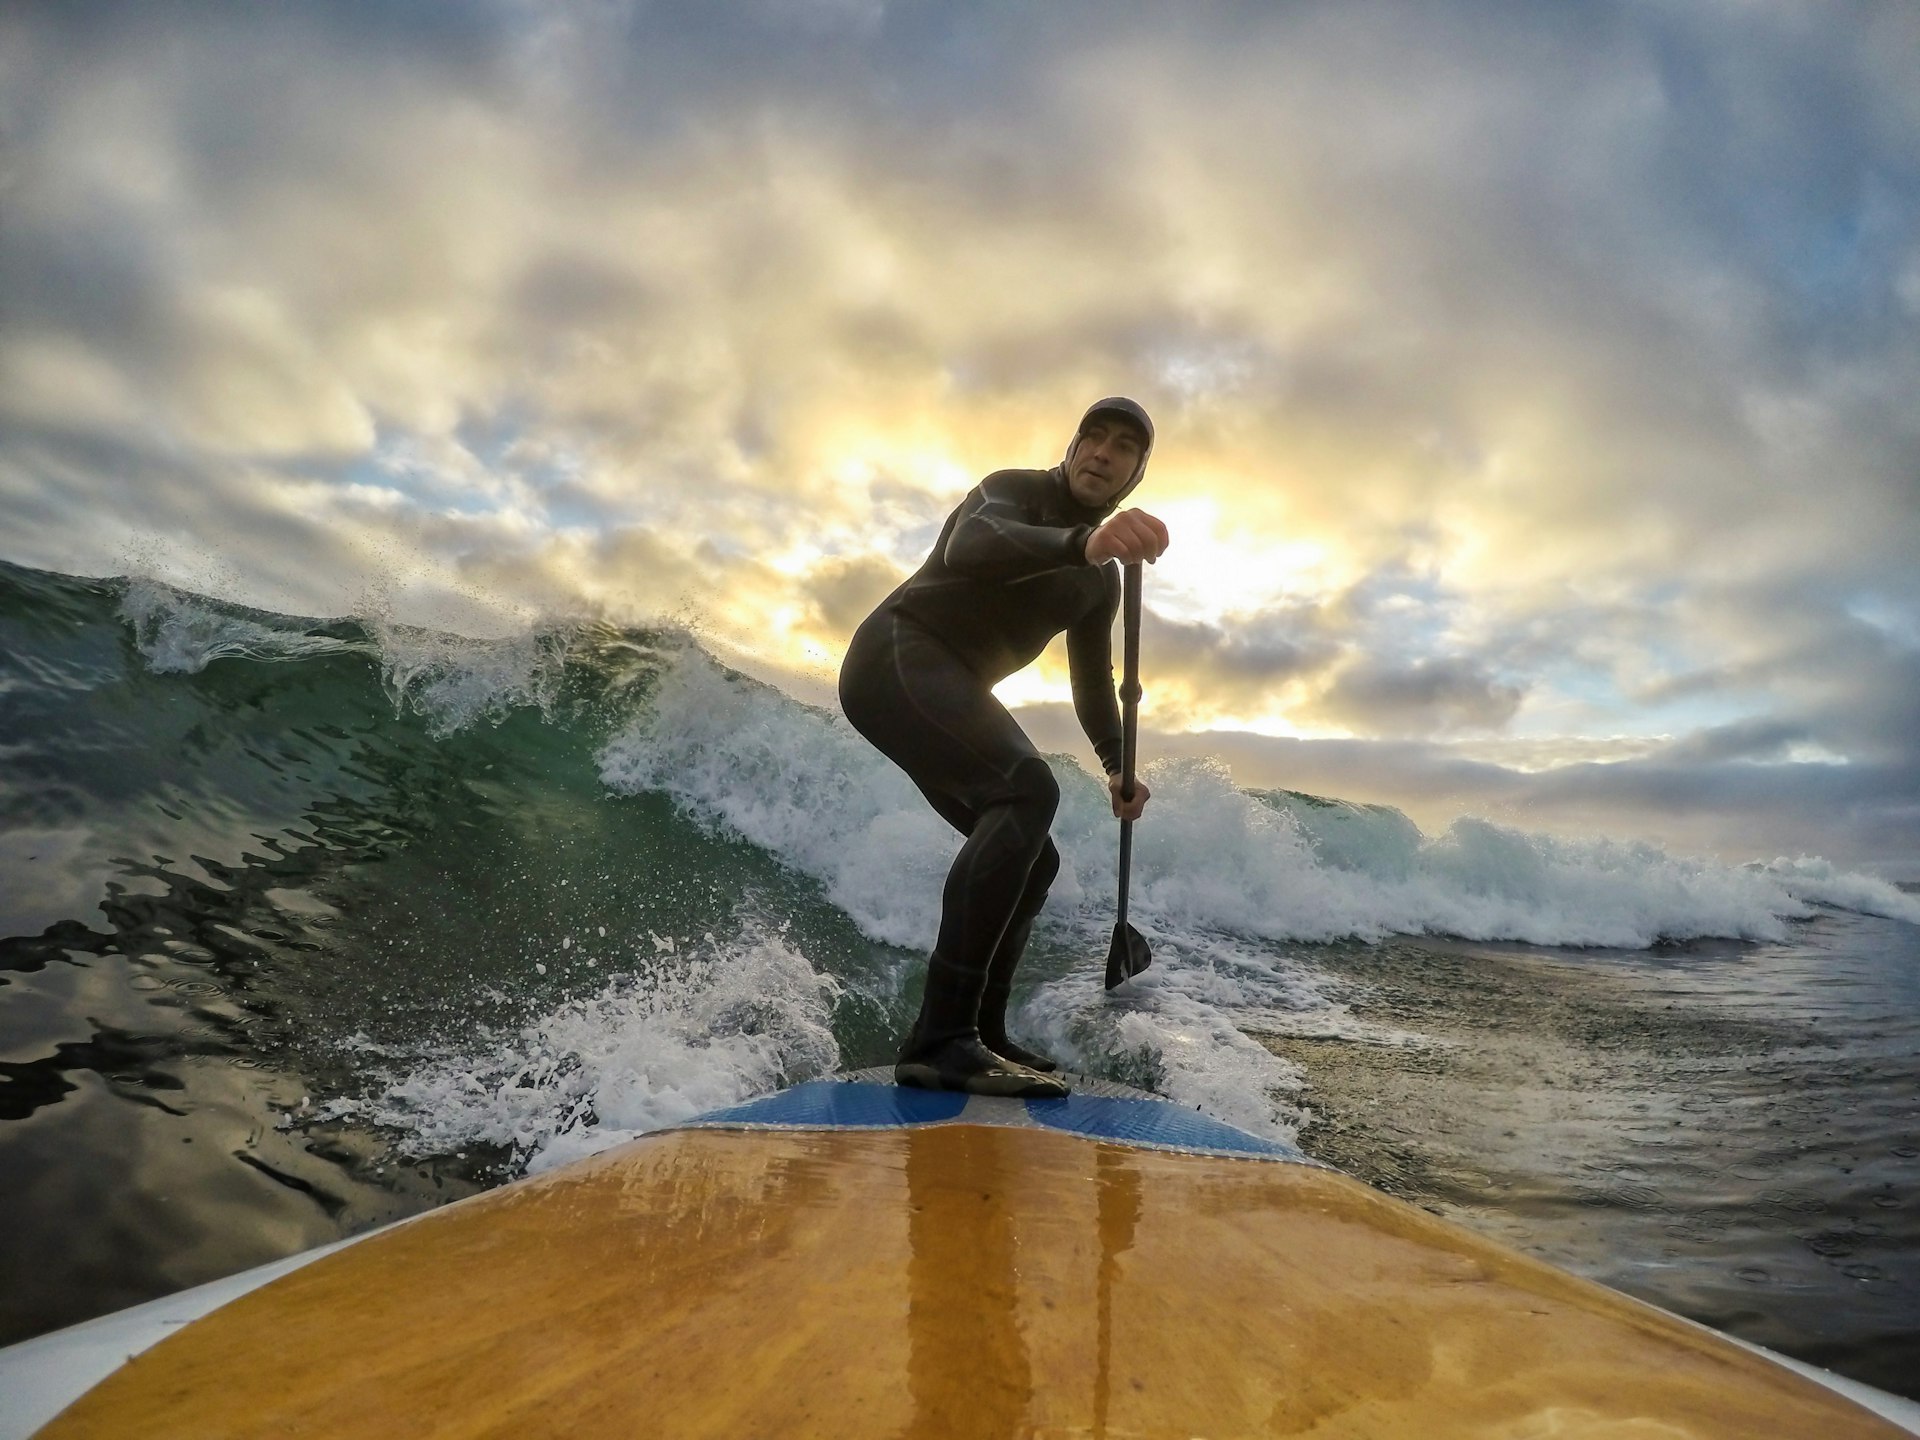 Man paddle surfing waves at the Pacific Ocean in Tofino during a cloudy winter sunset